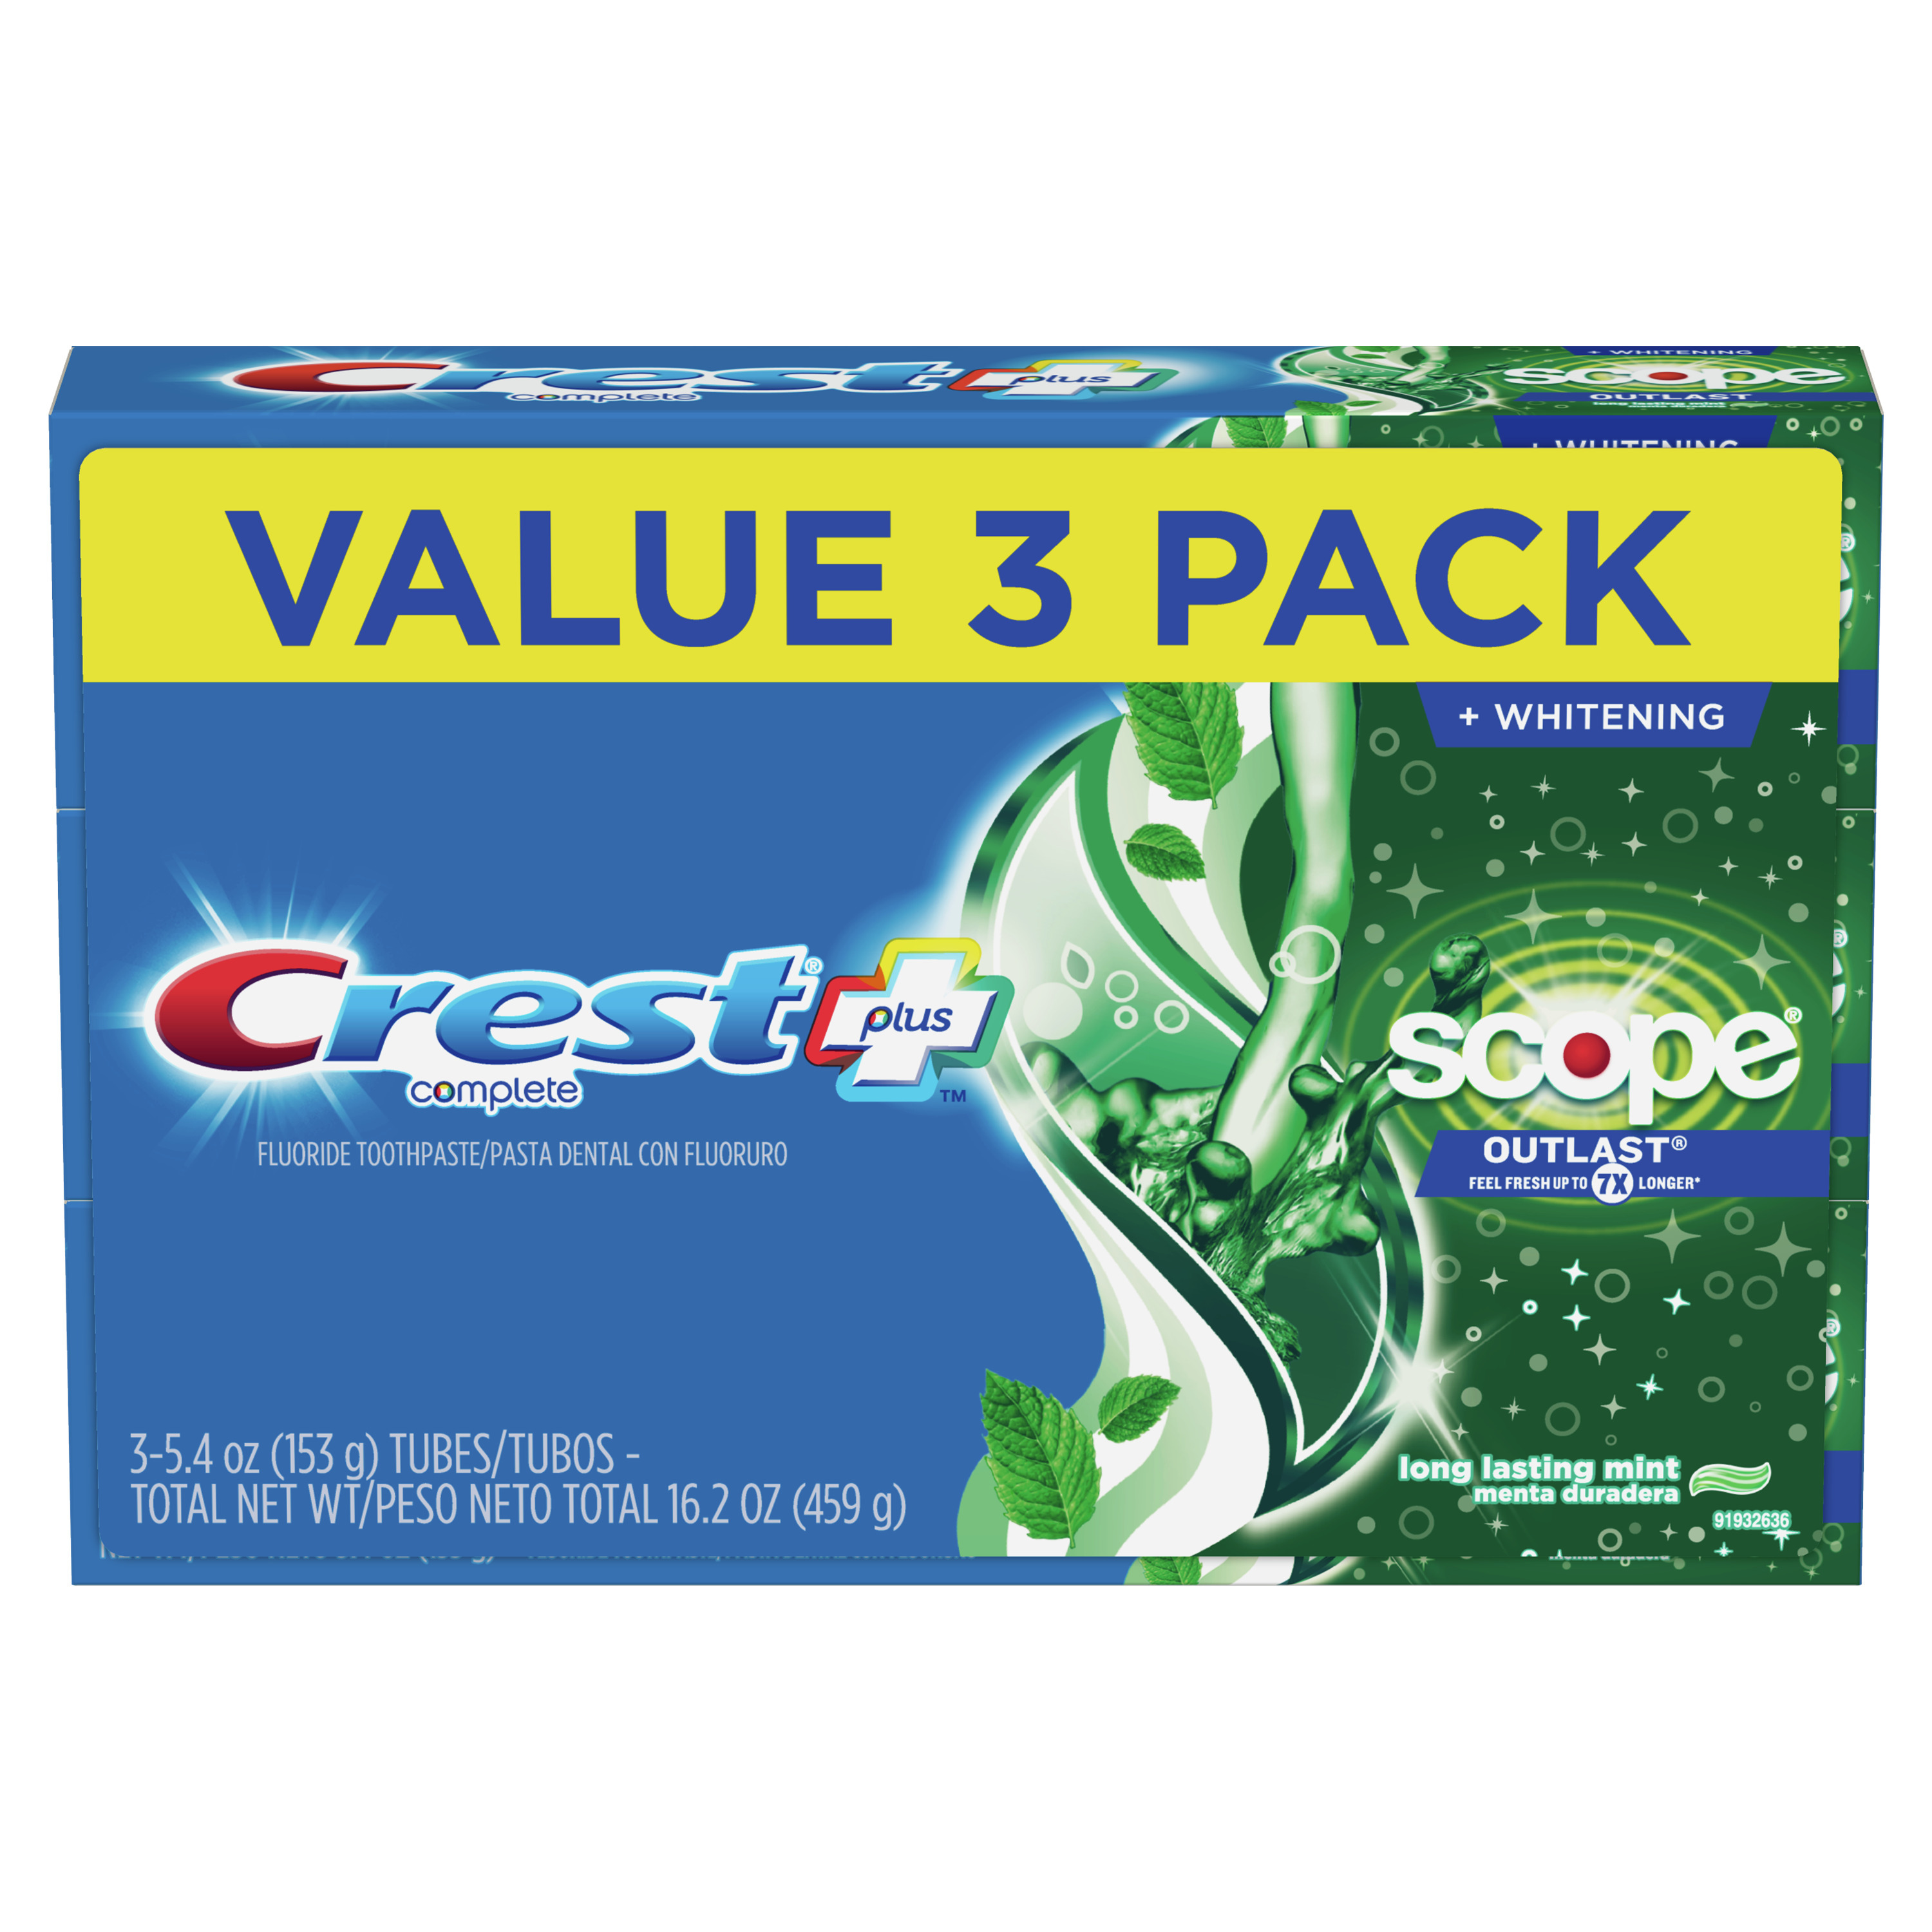 Crest + Scope Outlast Complete Whitening Toothpaste, Mint, 5.4 oz, Pack of 3 - image 9 of 10